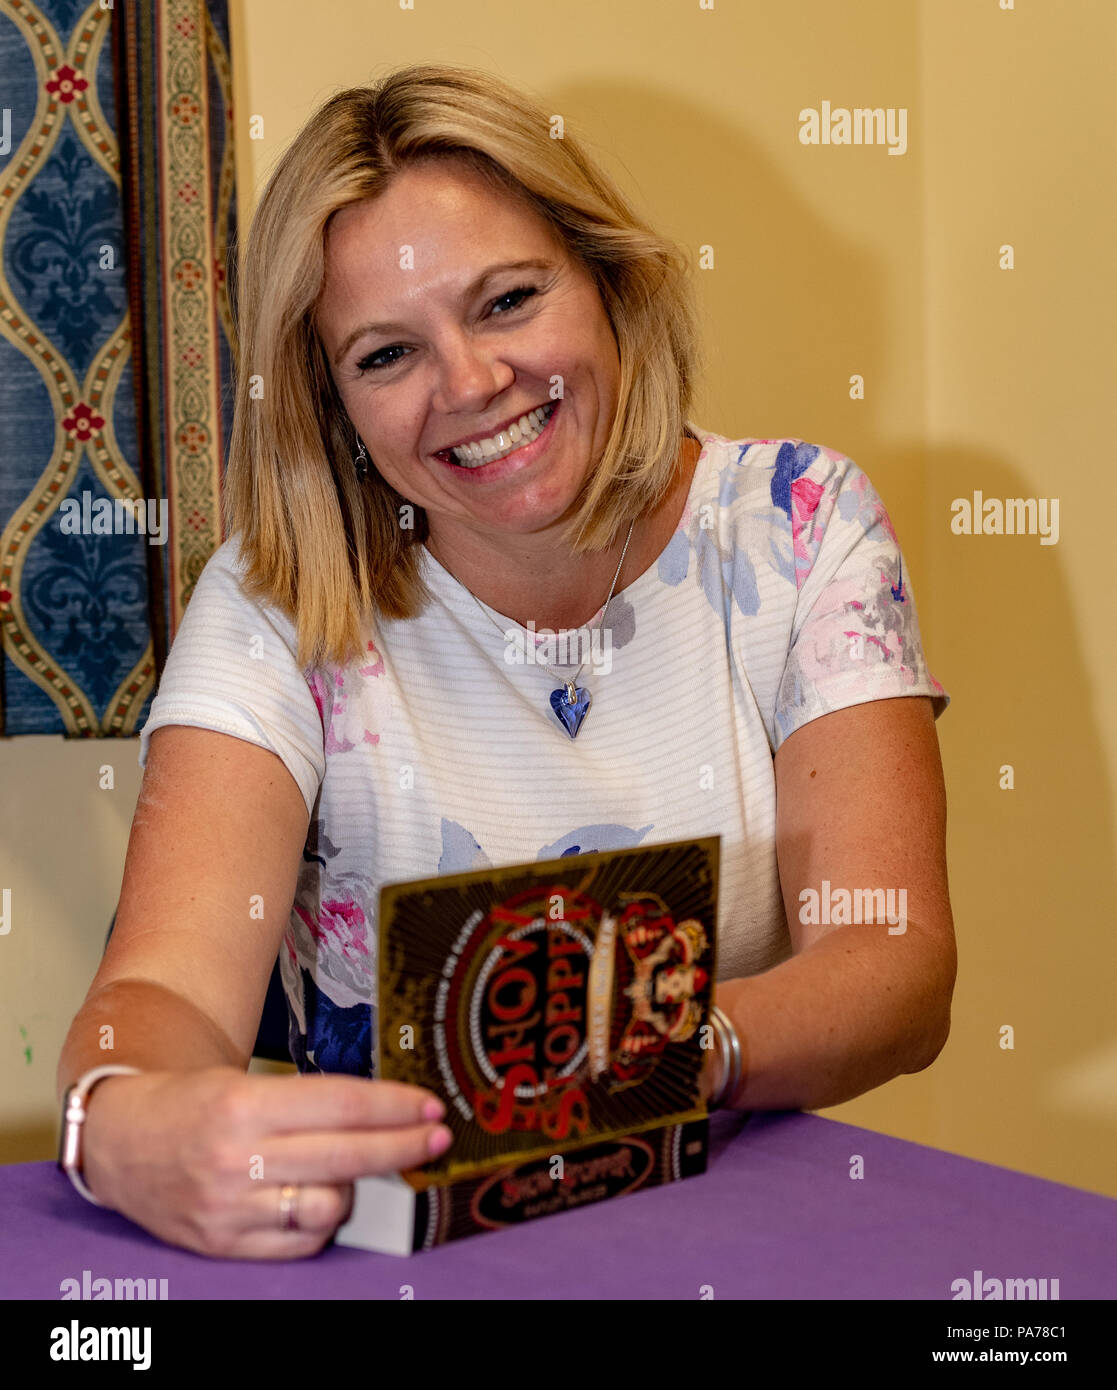 Brentwood Essex, 21st July 2018 Brentwood Children's Literary festival starts with author Hayley Barker (talking about her best selling book show Stopper and her new book Show stealer  Signing a book for a fan  Credit Ian Davidson/Alamy Live News Stock Photo